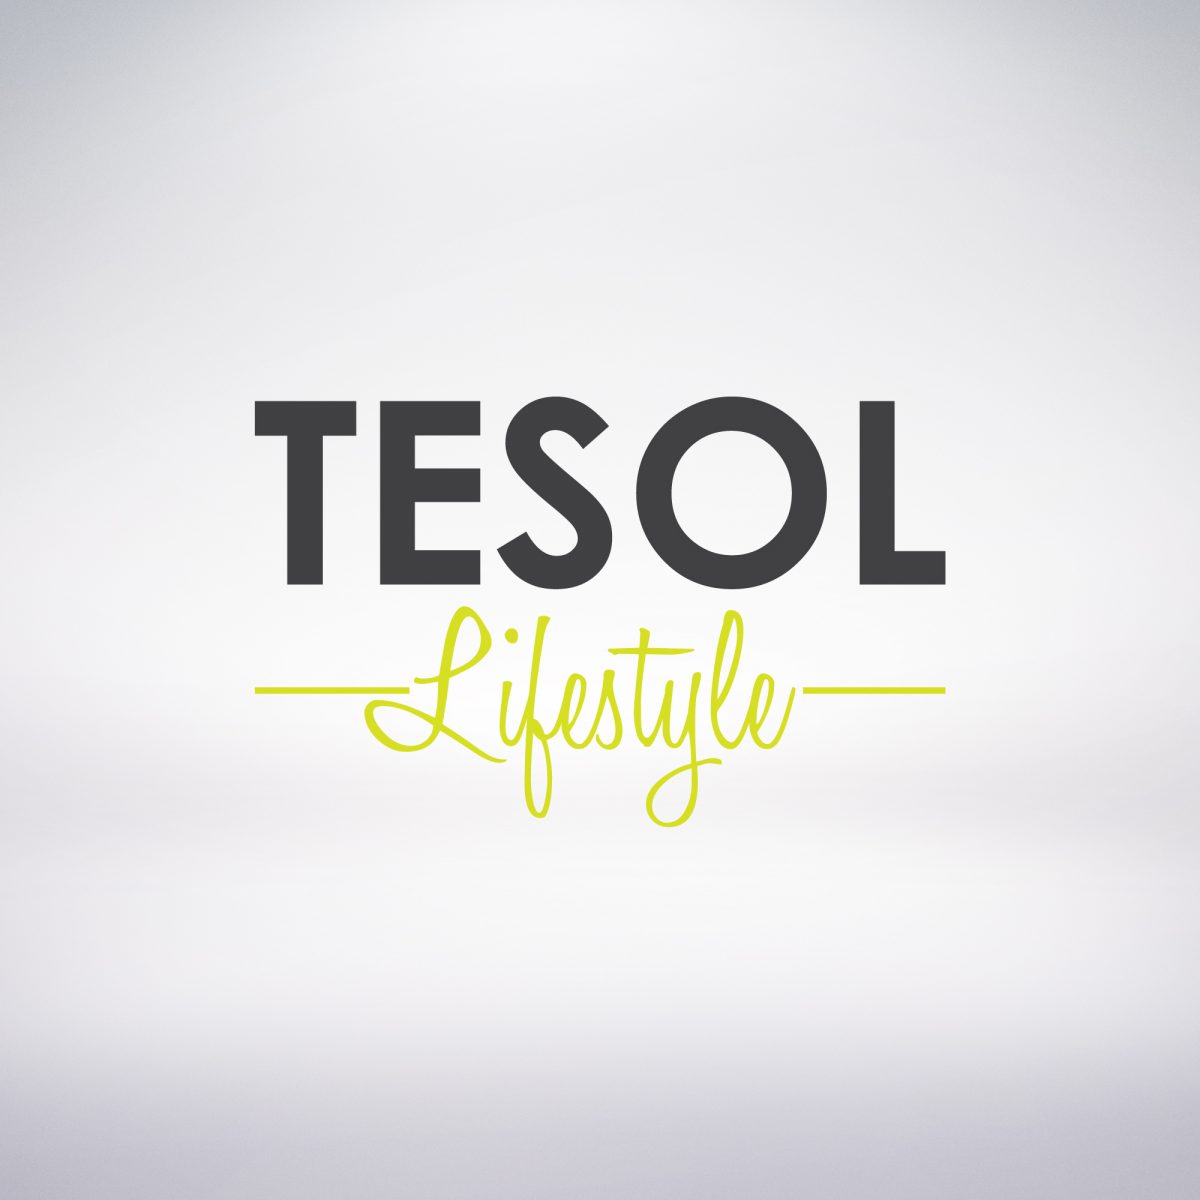 TESOL Degree Course - Everything To Know About The Classes